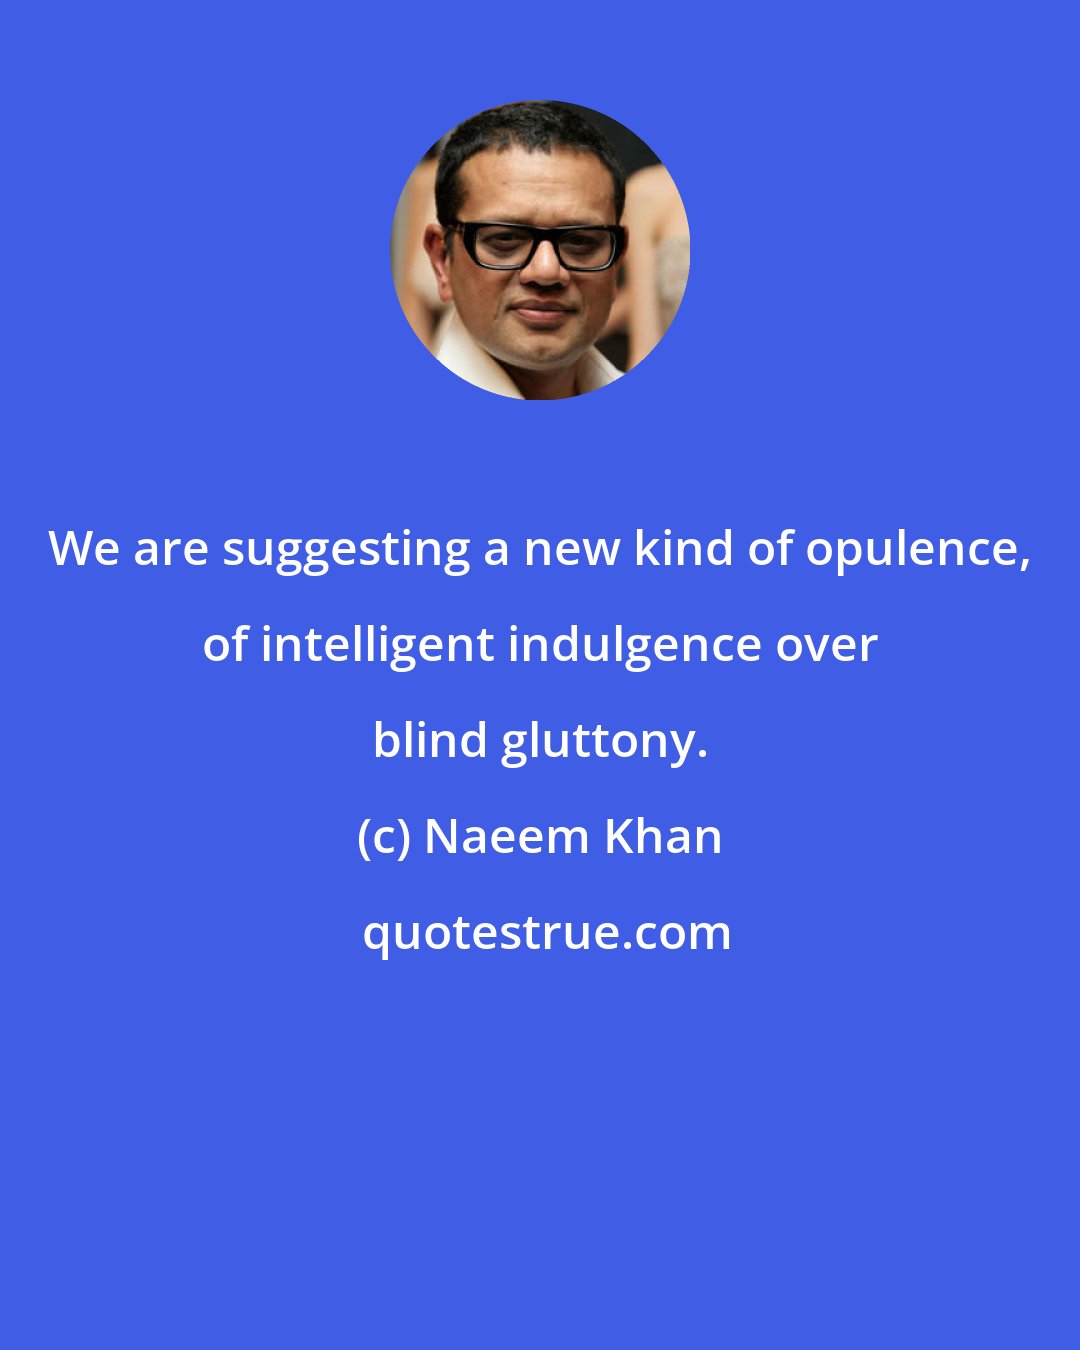 Naeem Khan: We are suggesting a new kind of opulence, of intelligent indulgence over blind gluttony.